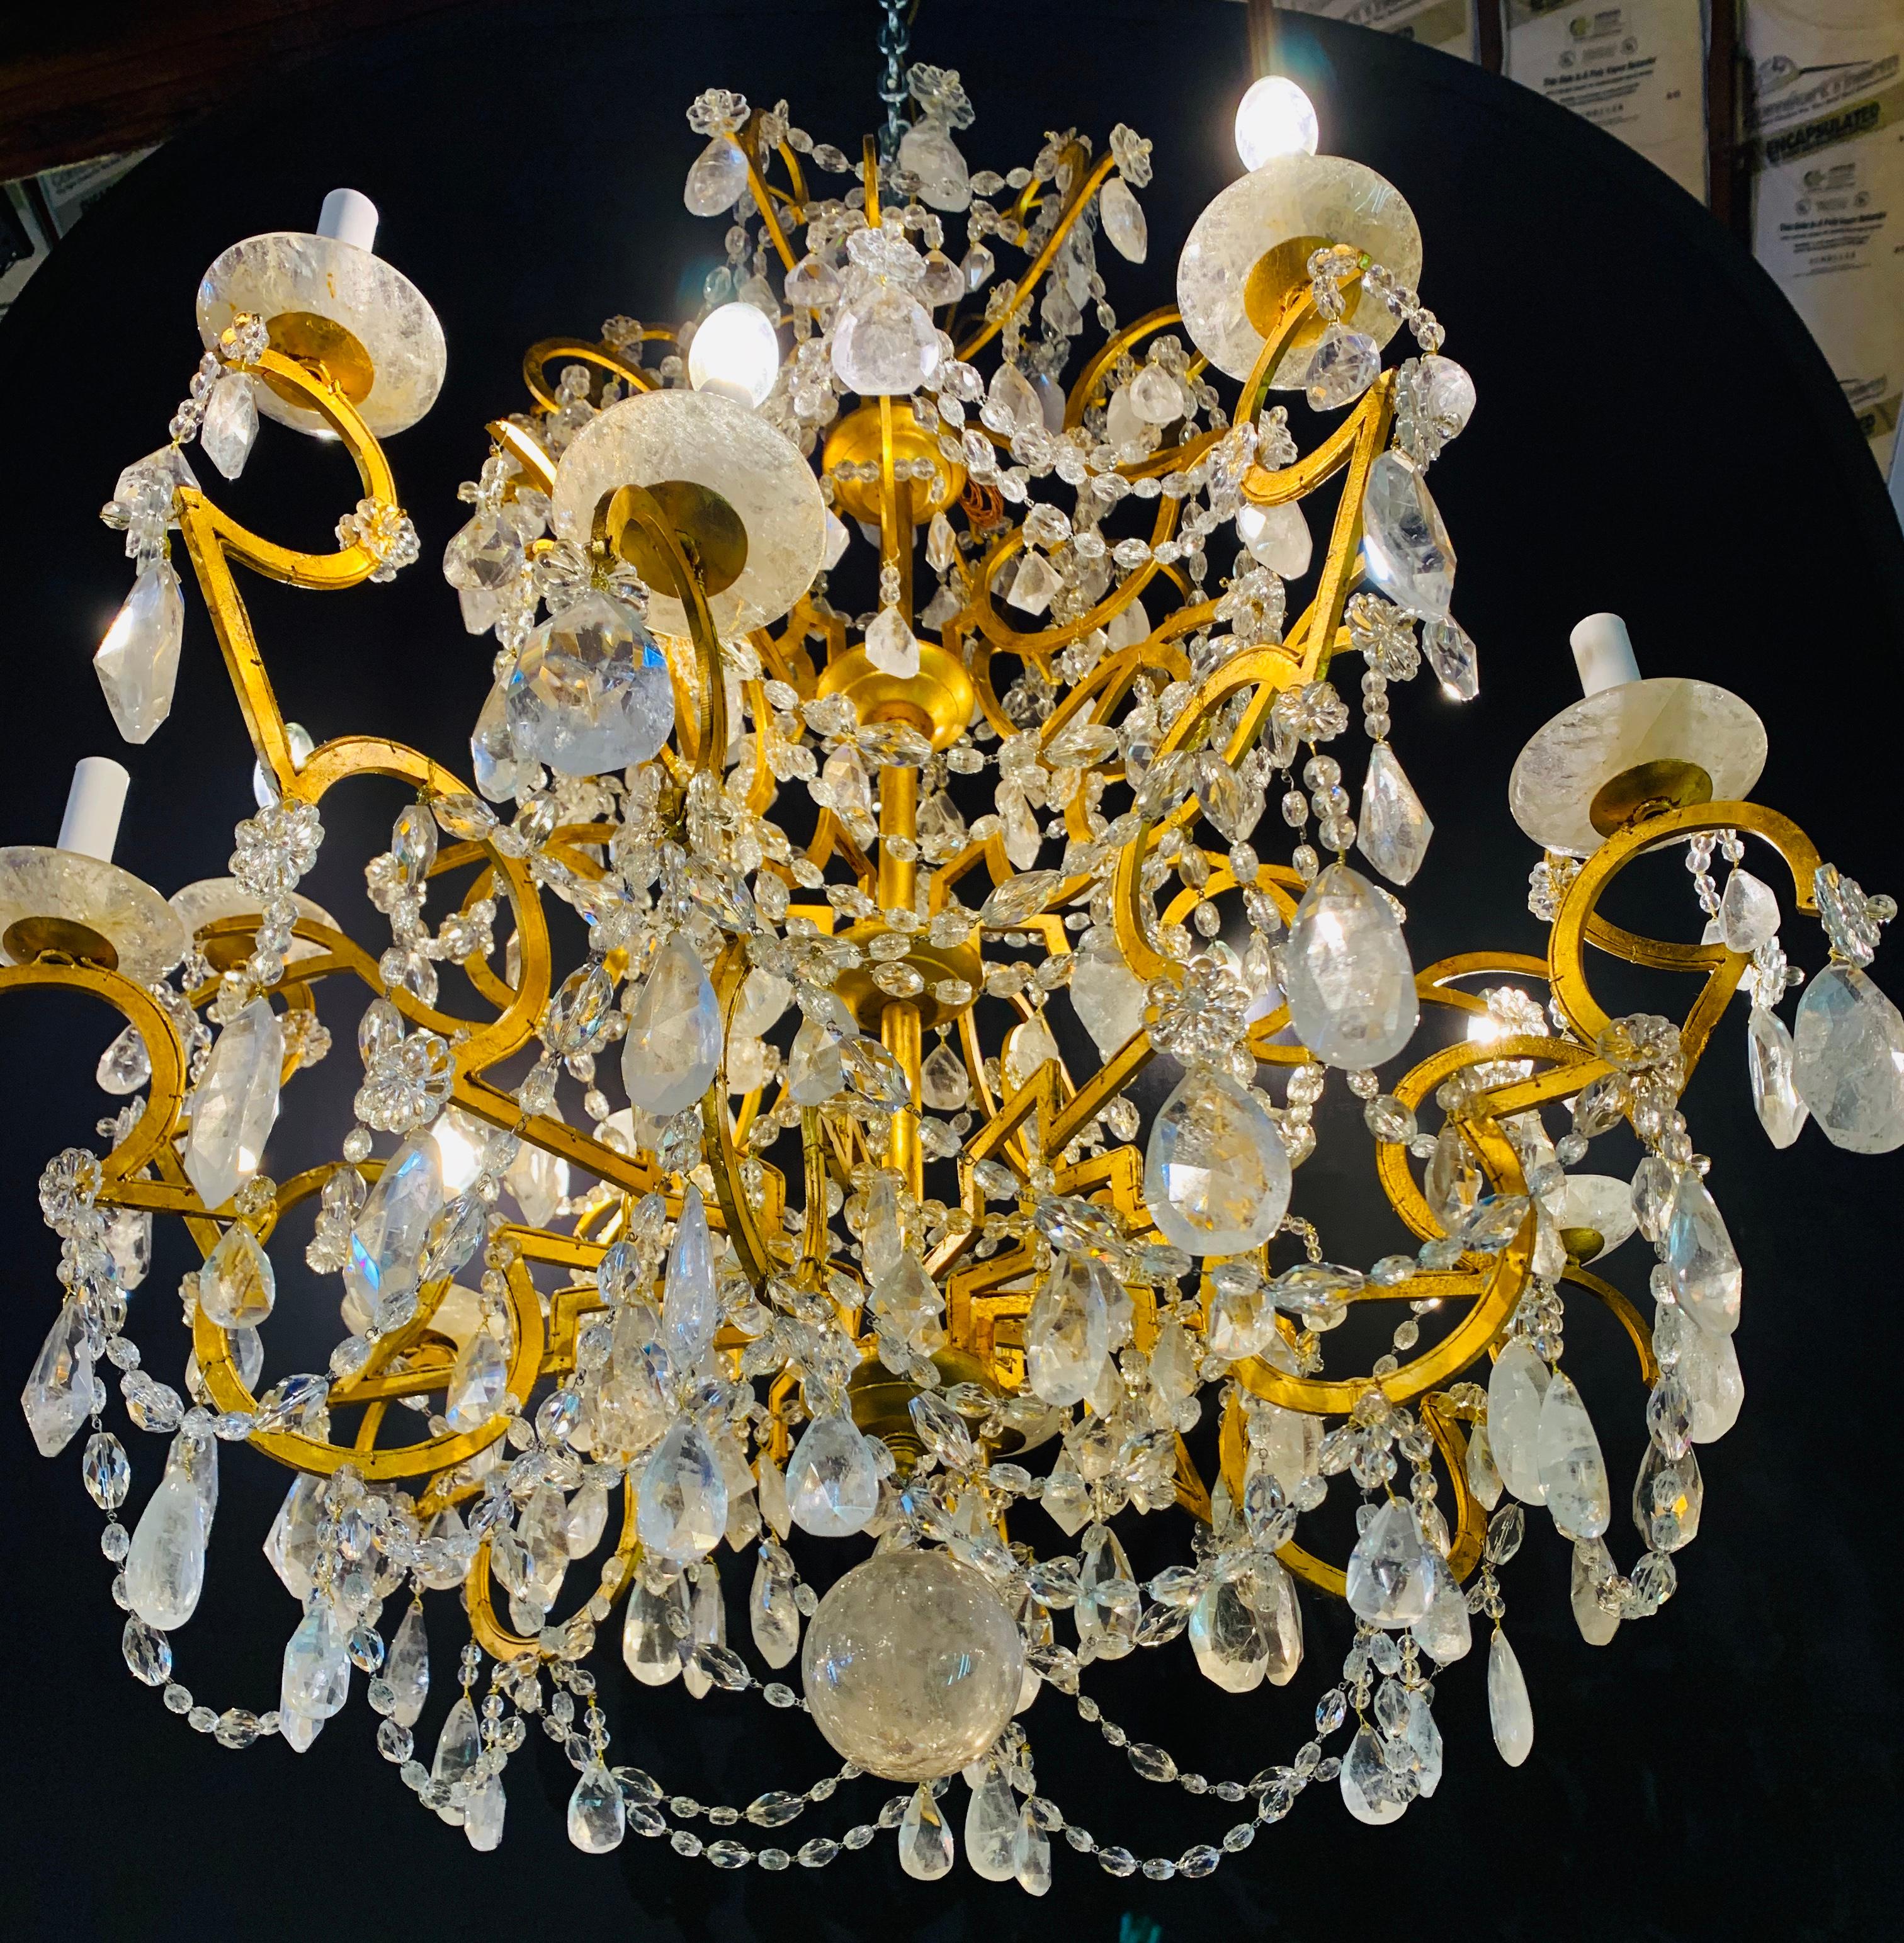 12 Light Gilt Metal Chandelier Having Multiple Rock Crystal Prisms in the Hollywood Regency Style. This large and impressive recently rewired chandelier has fine rock crystal prisms and rock crystal bobeches on all arms. The entire frame has been